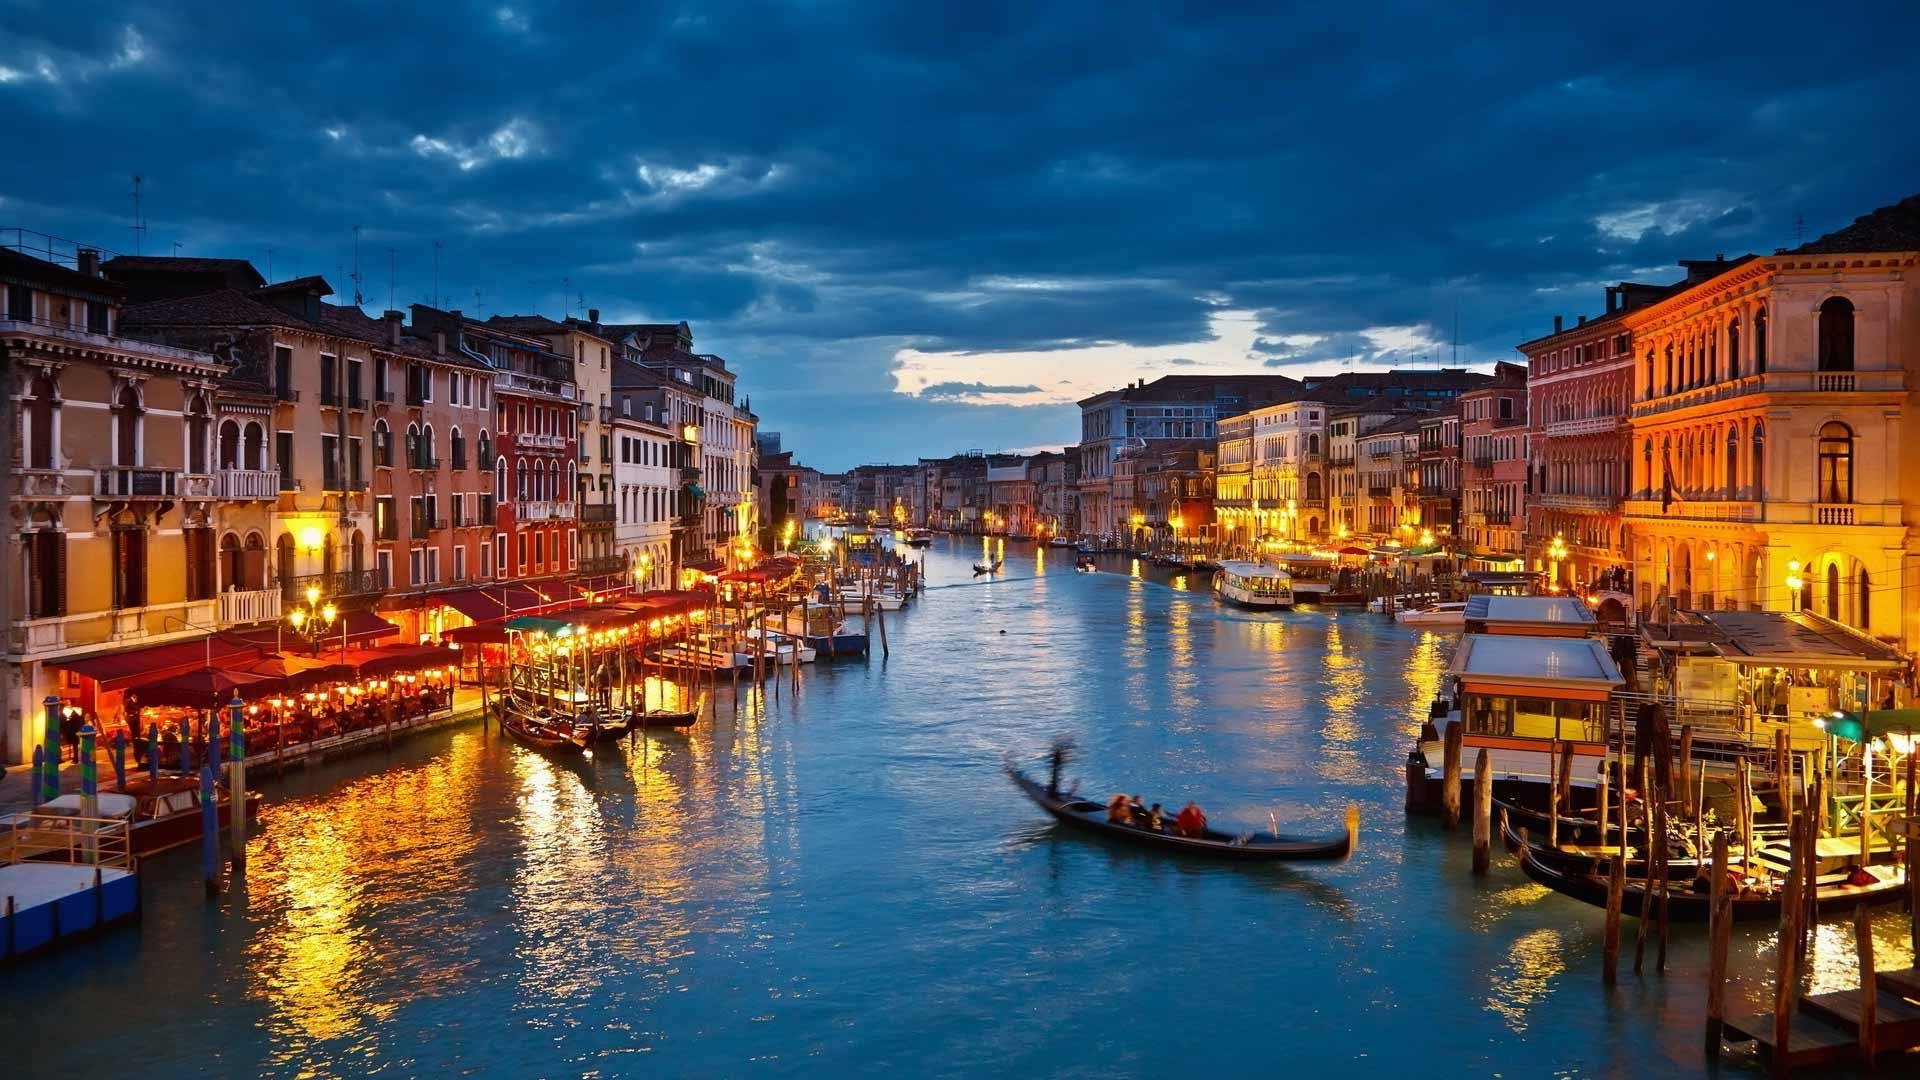 Europe's Famous City Venice Italy Background